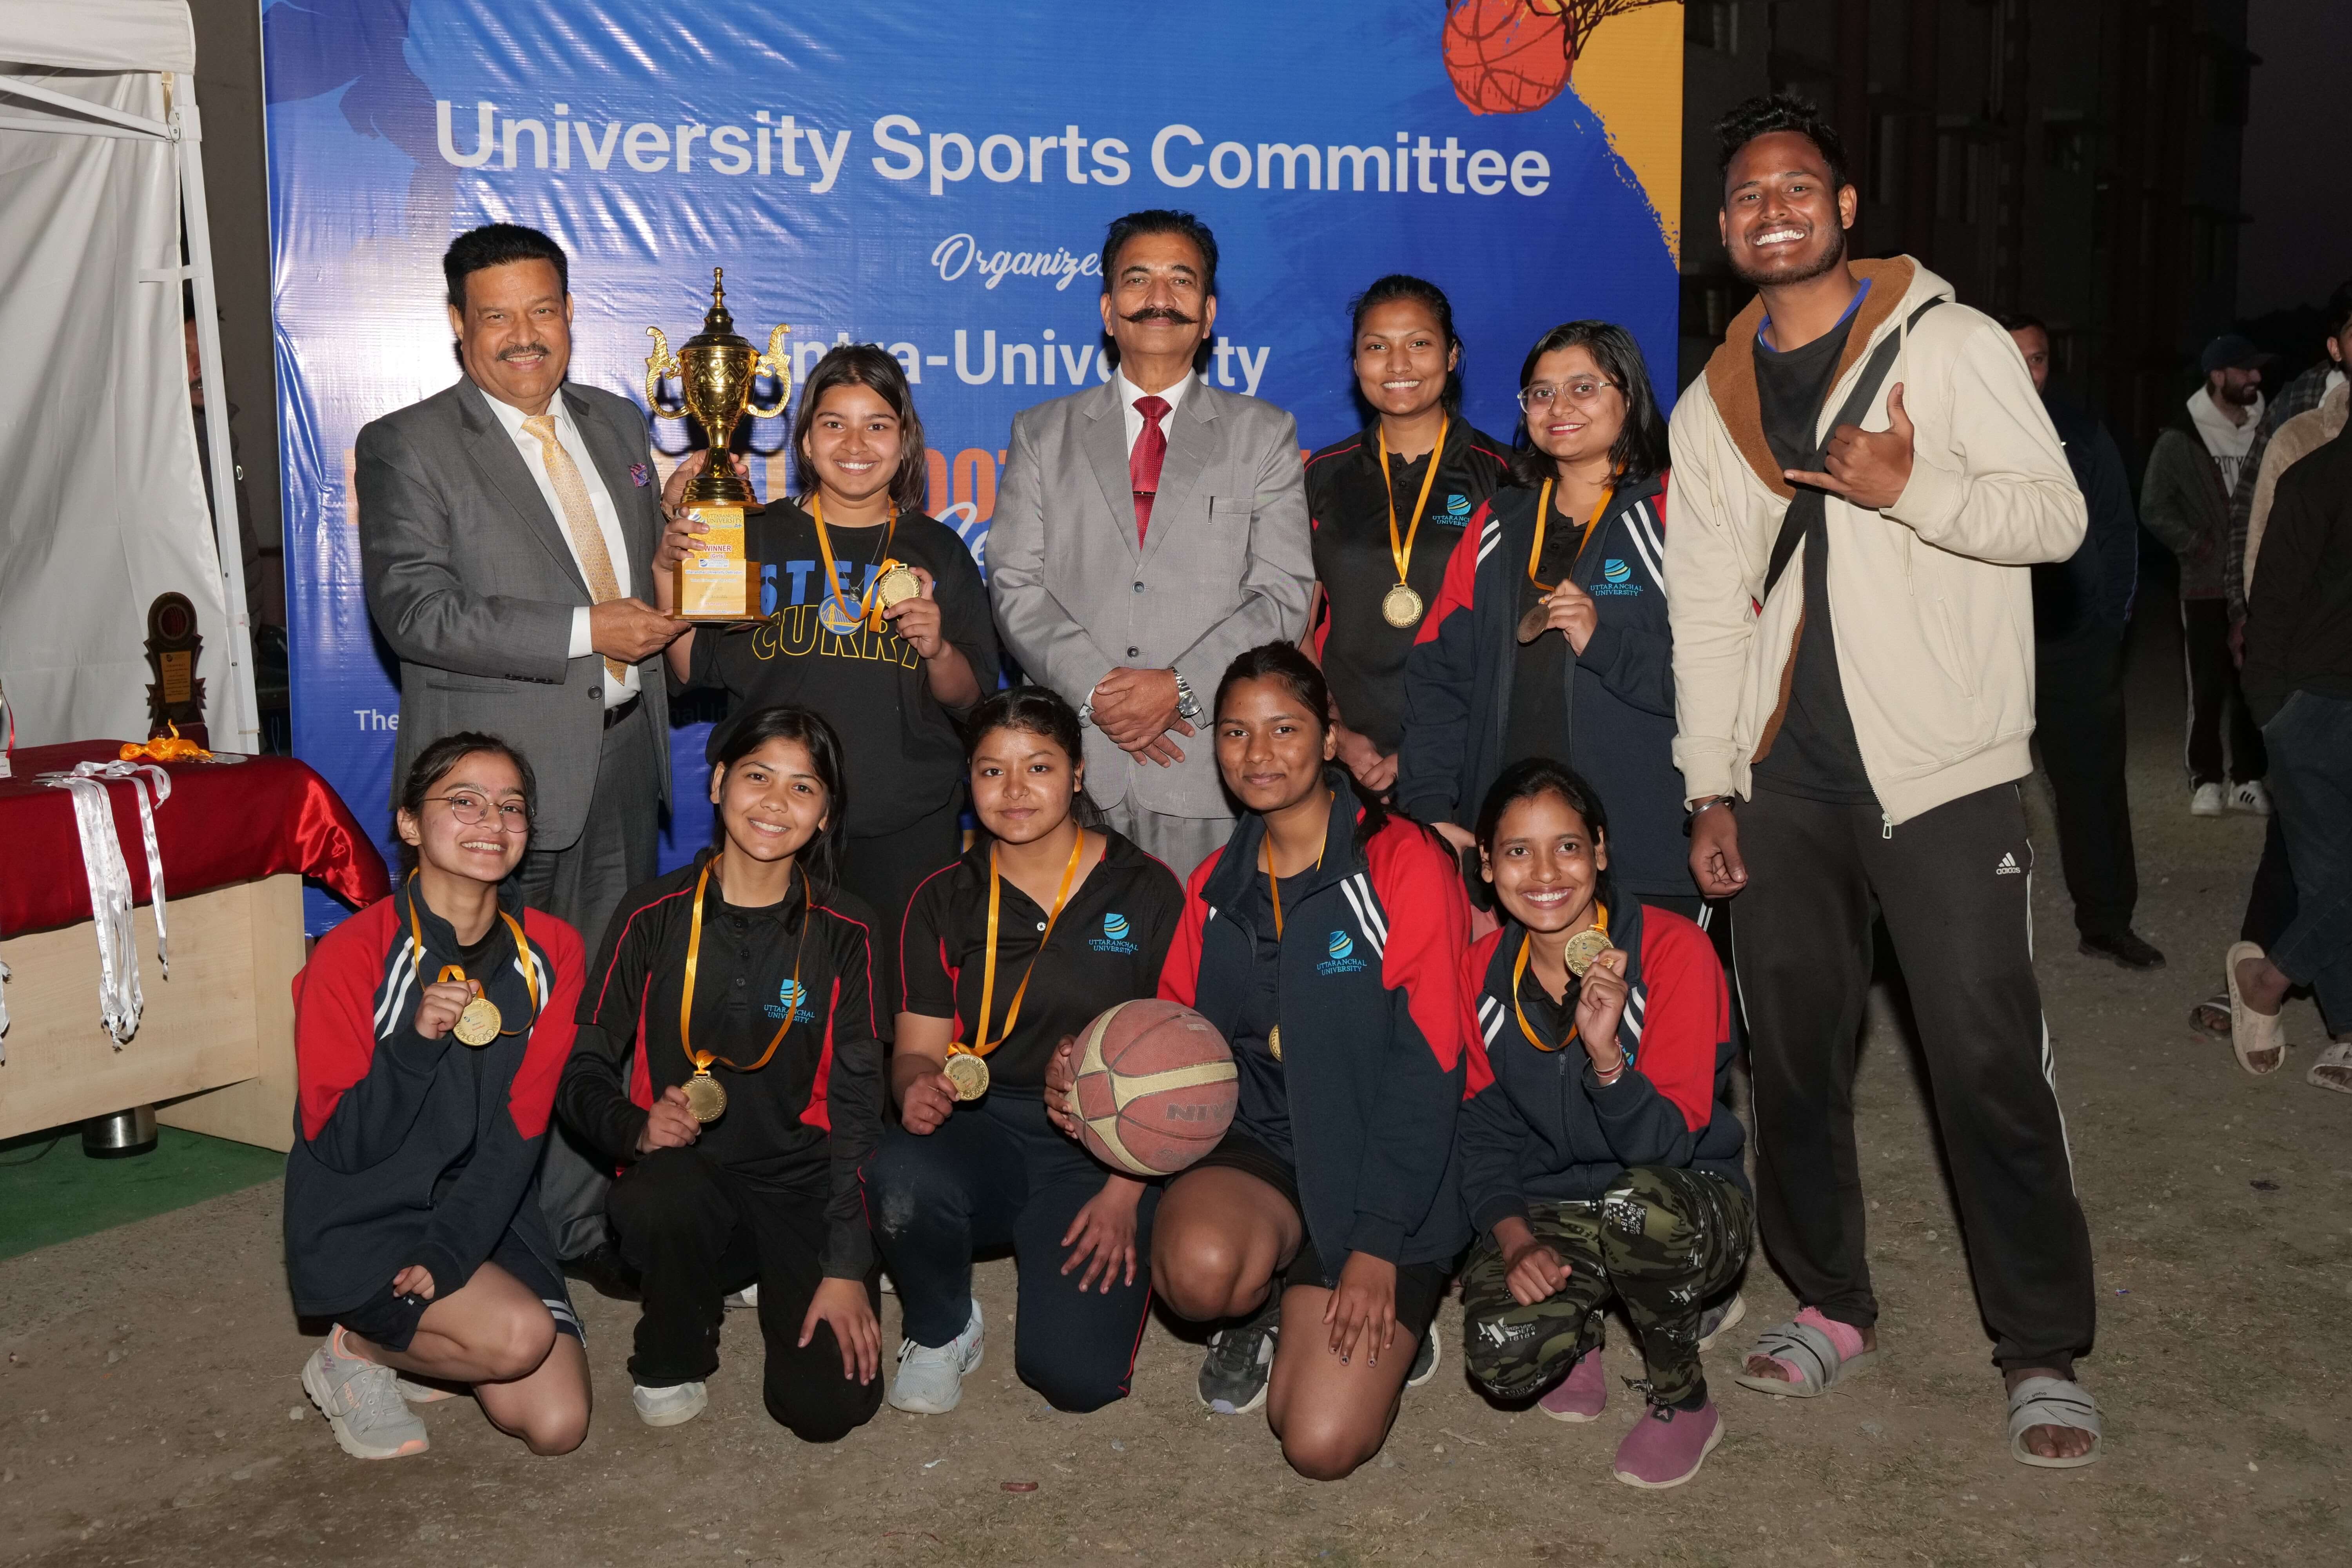 University Sports Committee, Uttaranchal University in collaboration with the Sports Club of Uttaranchal Institute of Management organized Intra- colleges Basketball Tournament